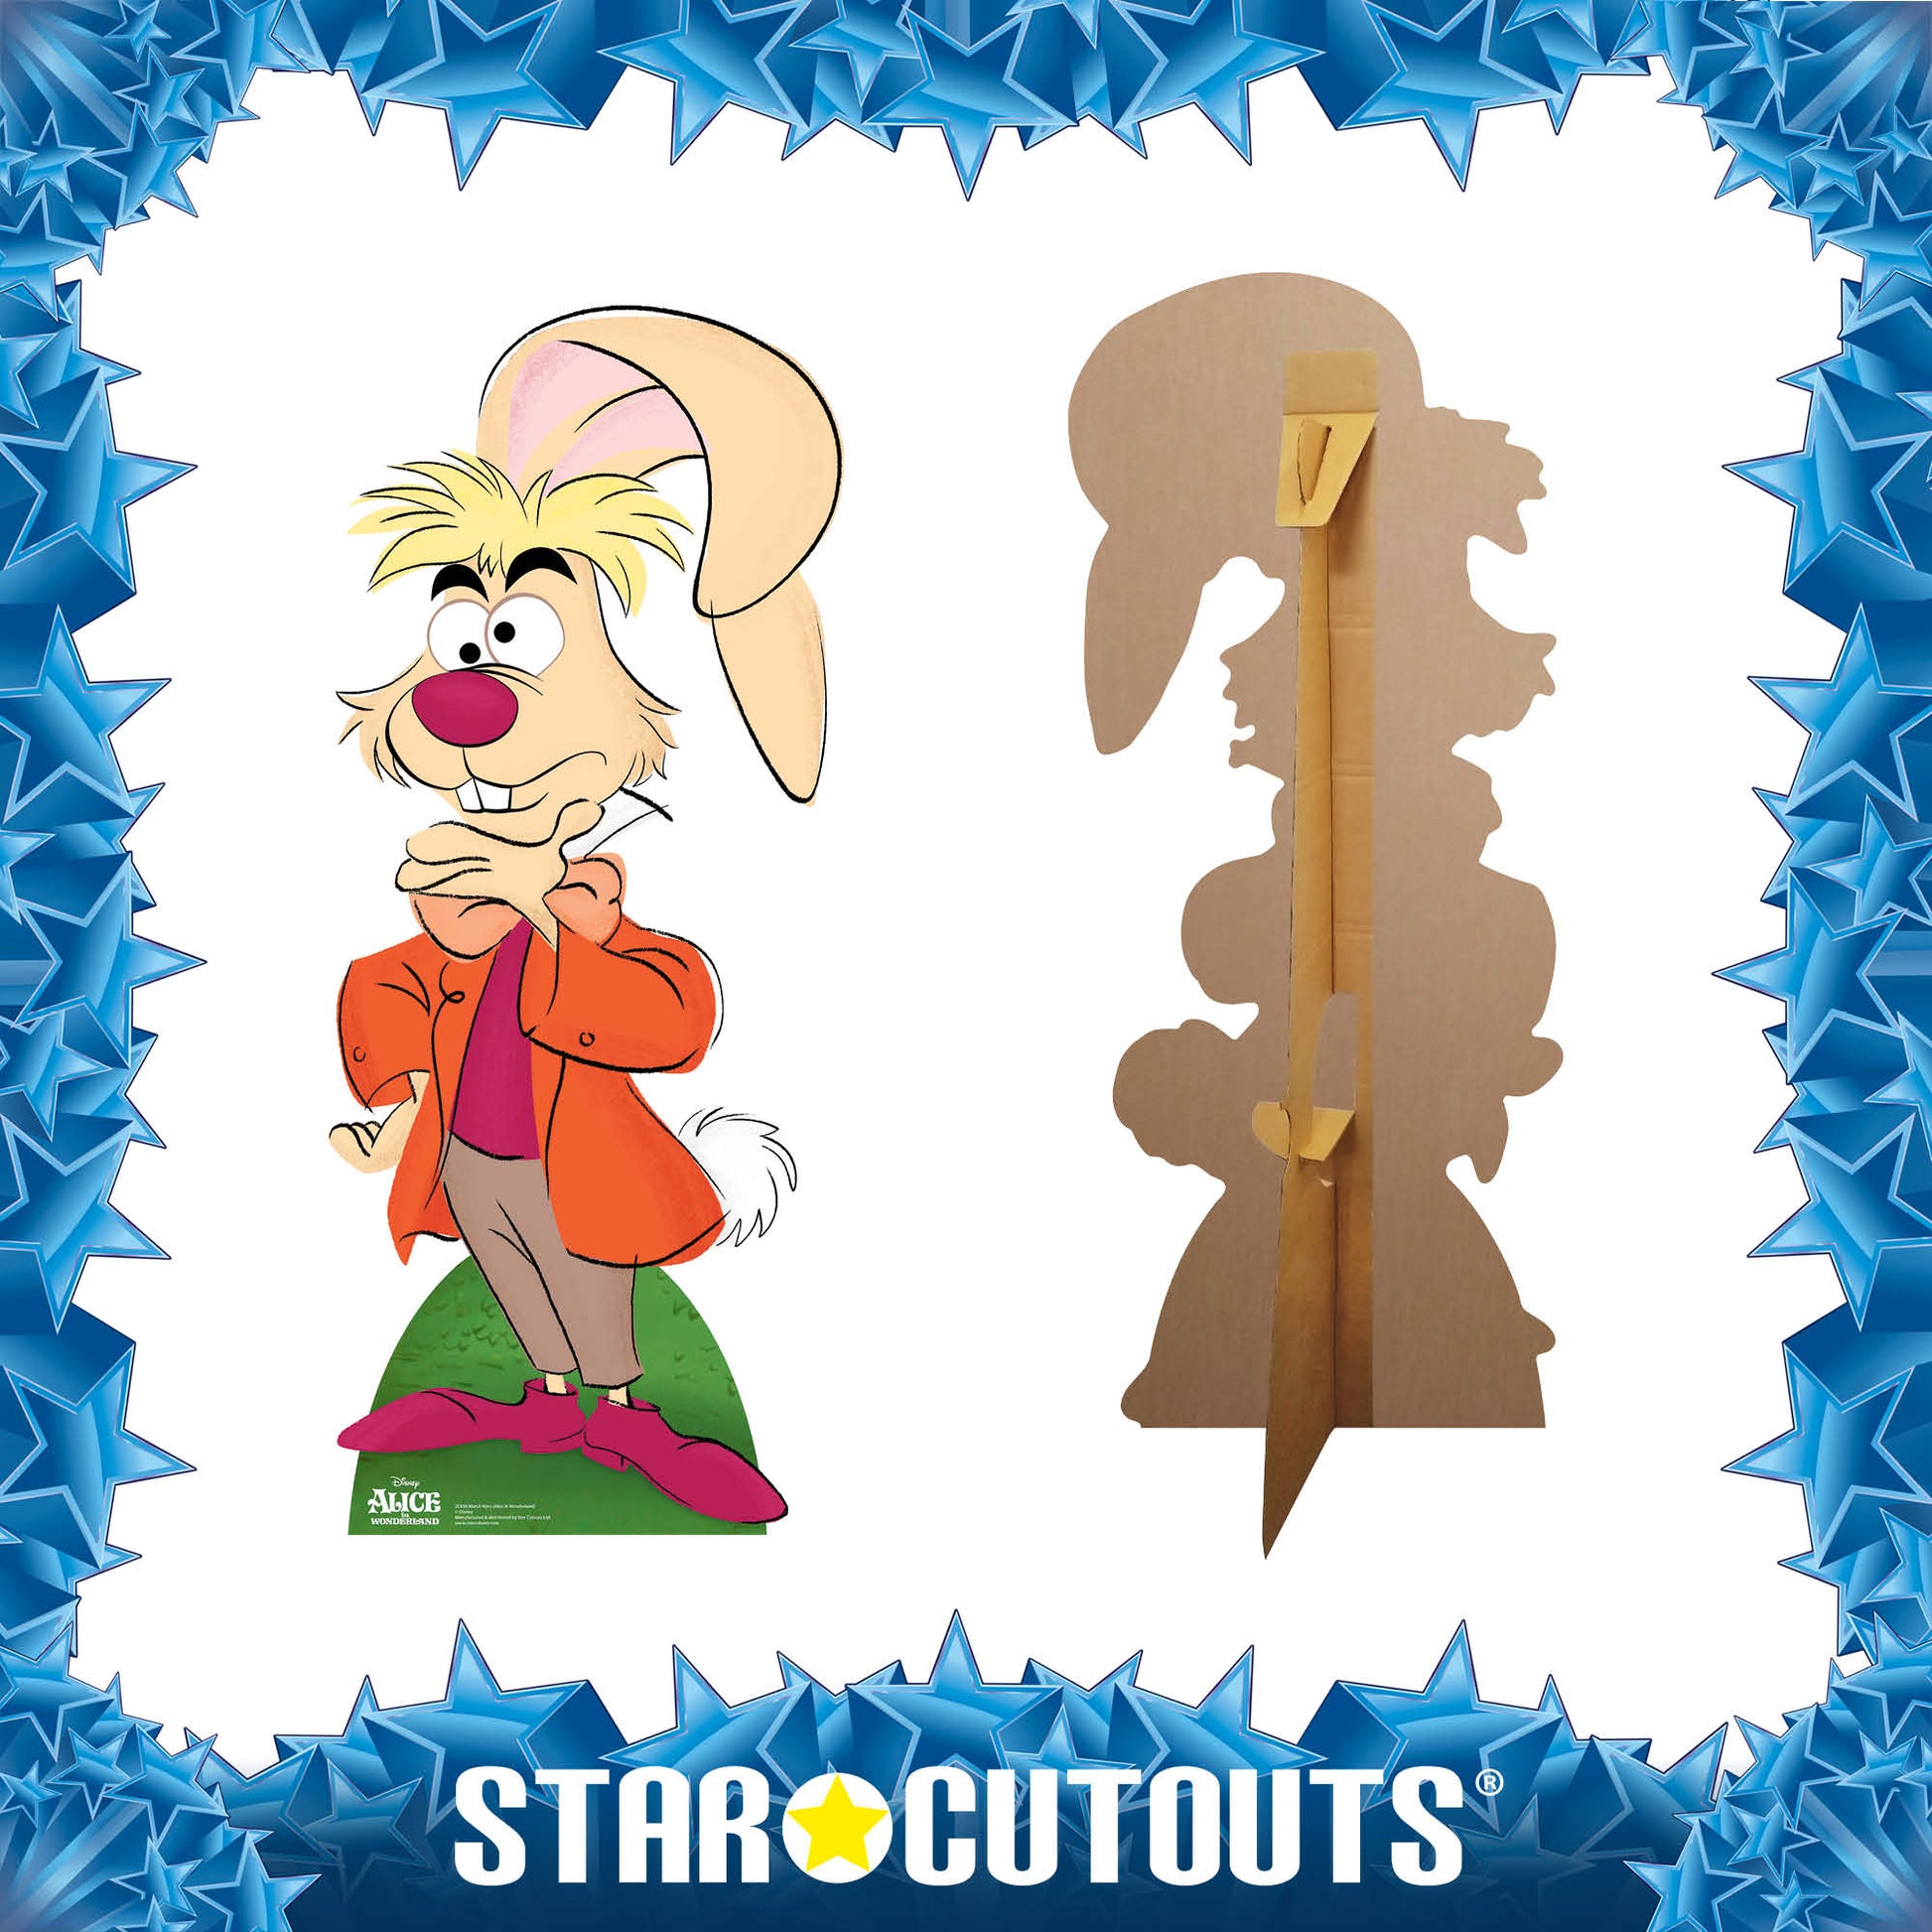 SC856 March Hare Classic Alice in Wonderland Cardboard Cut Out Height 131cm - Star Cutouts